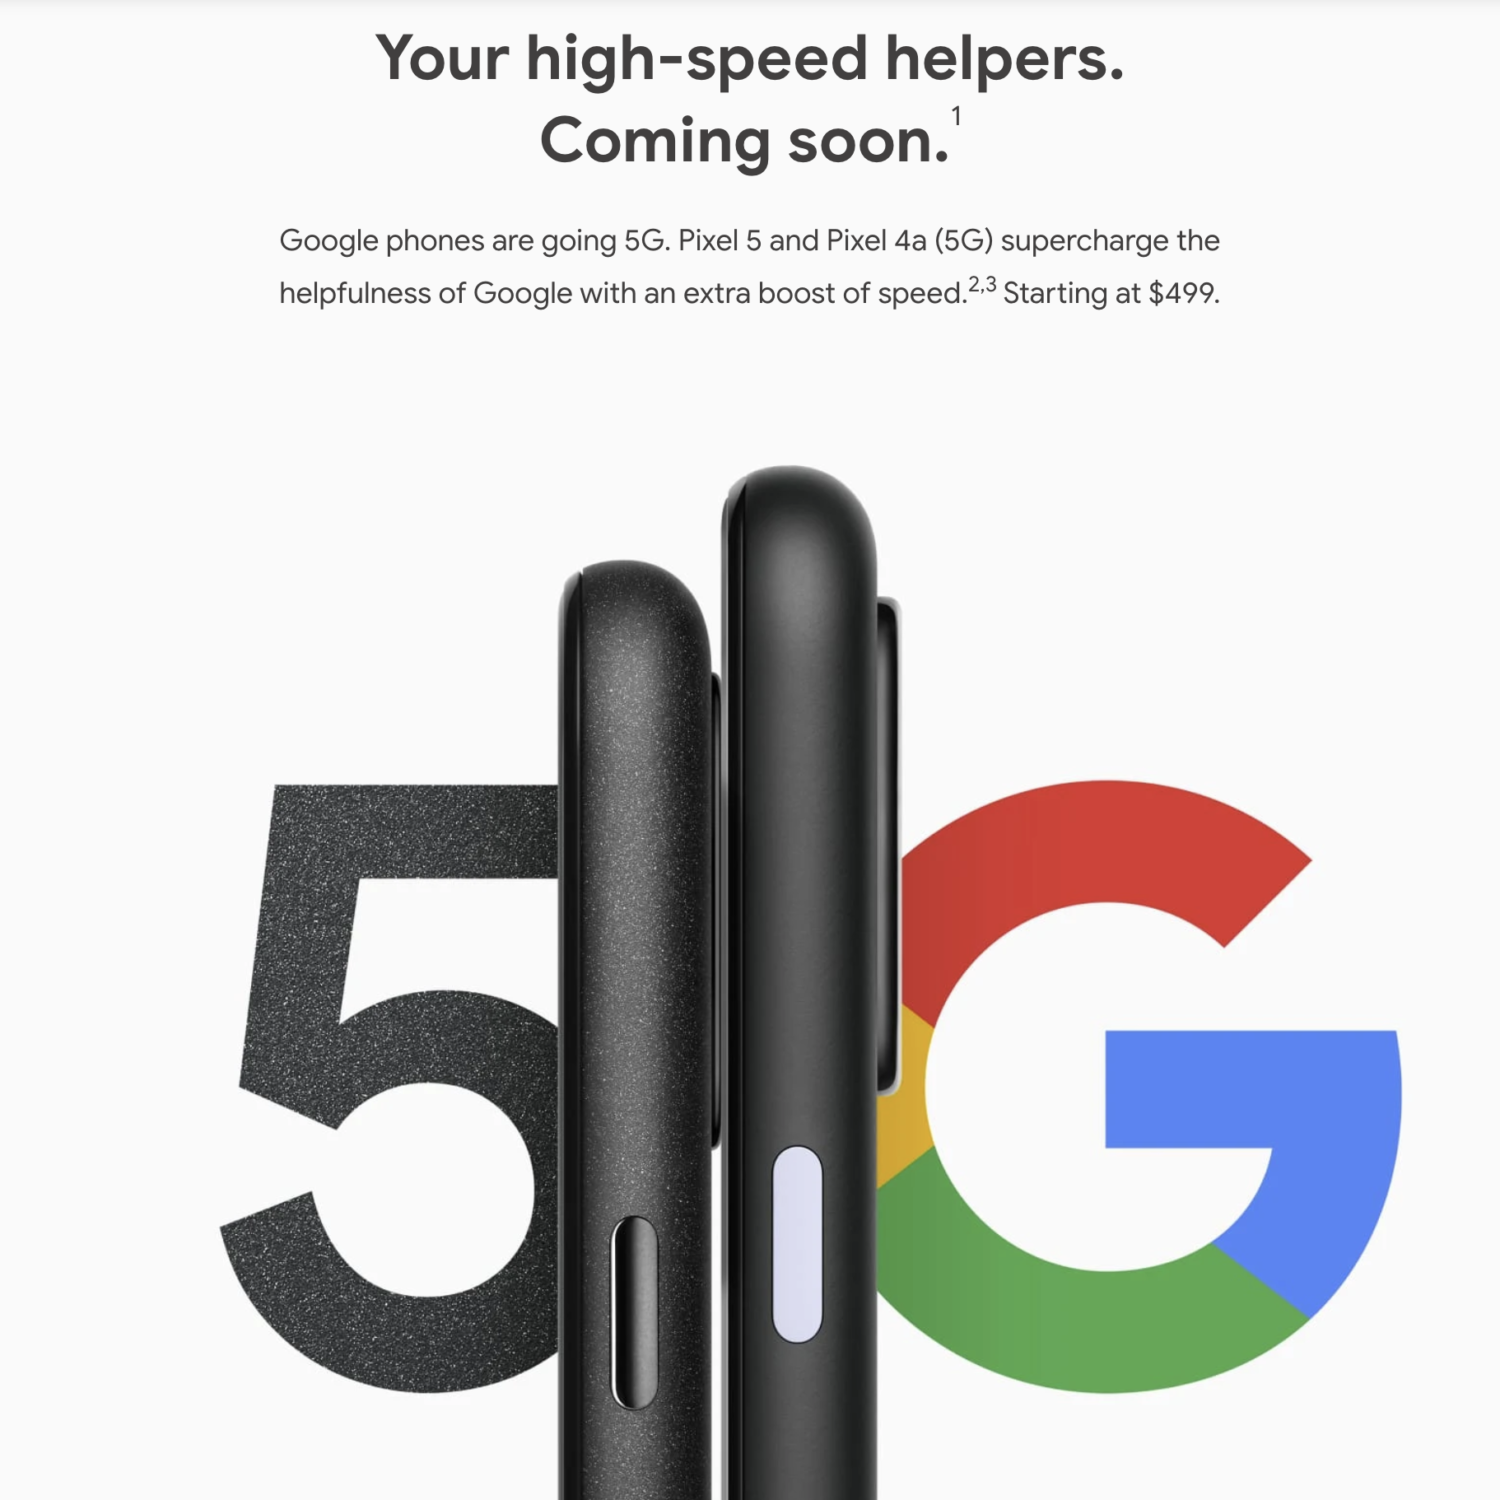 Google Pixel4a 5G & Pixel 5 will launch in late 2020 but not coming to India